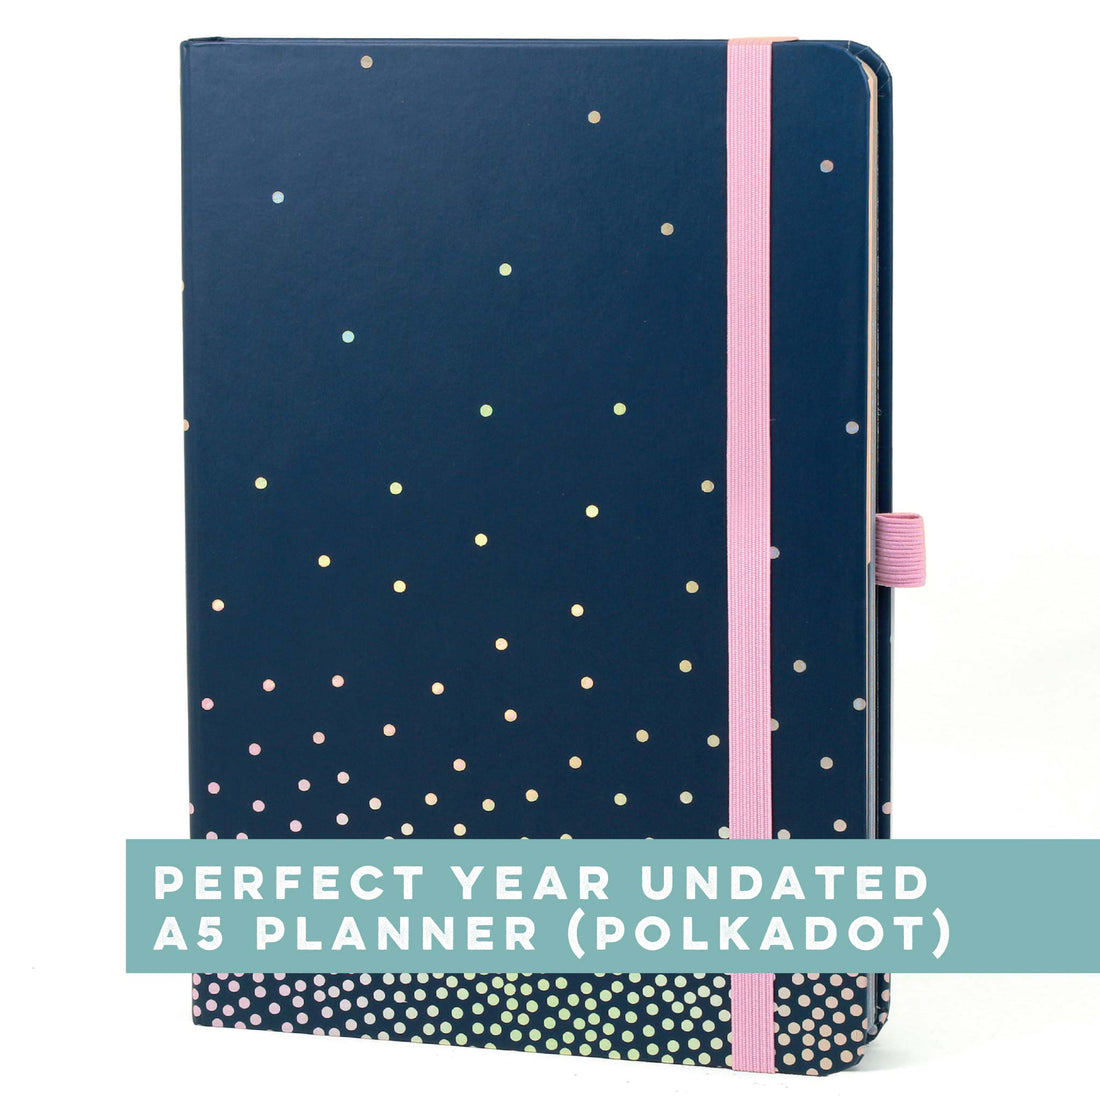 Perfect Year Undated A5 Planner (Polkadot)